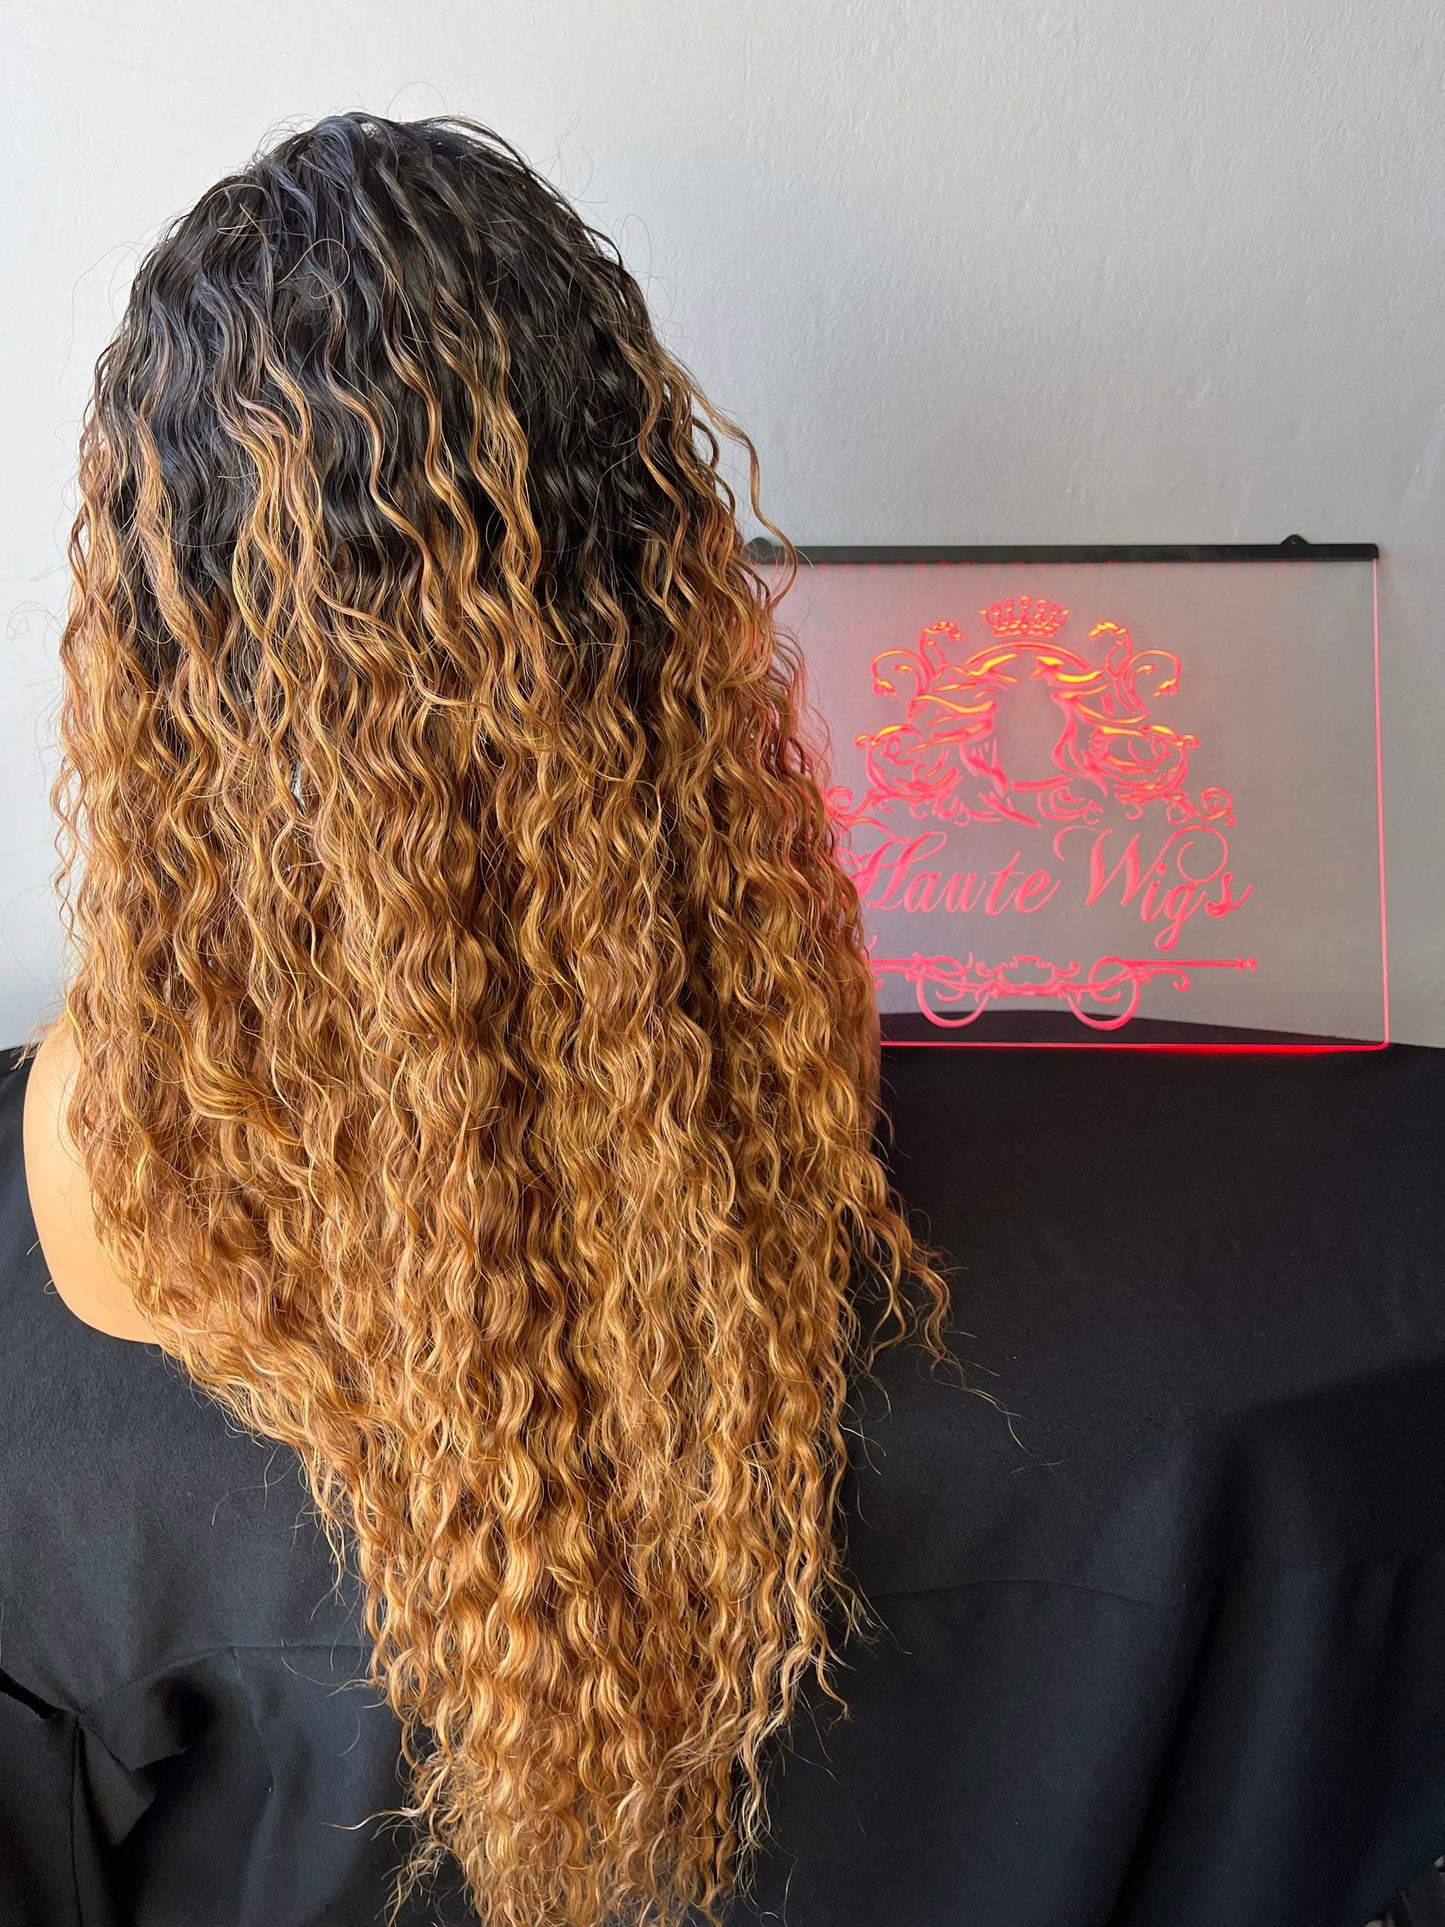 WET Look Jerry Curl Perm 24 Inch Blonde Light Golden Brown Ombre Wig W Bangs Fringe No Lace Front Human Hair Synthetic Blends Extra CURLY